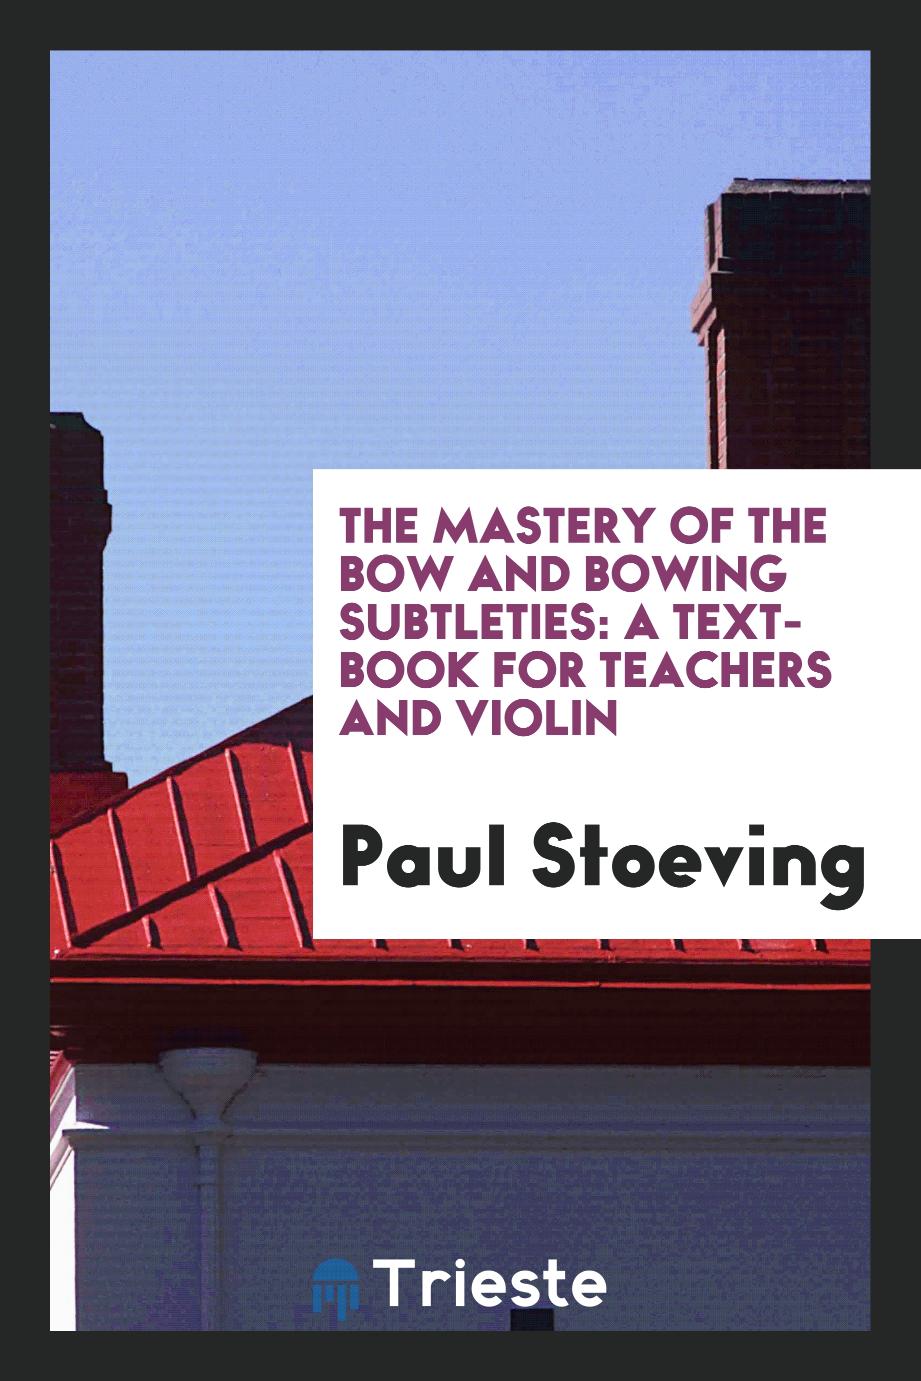 The Mastery of the Bow and Bowing Subtleties: A Text-Book for Teachers and Violin